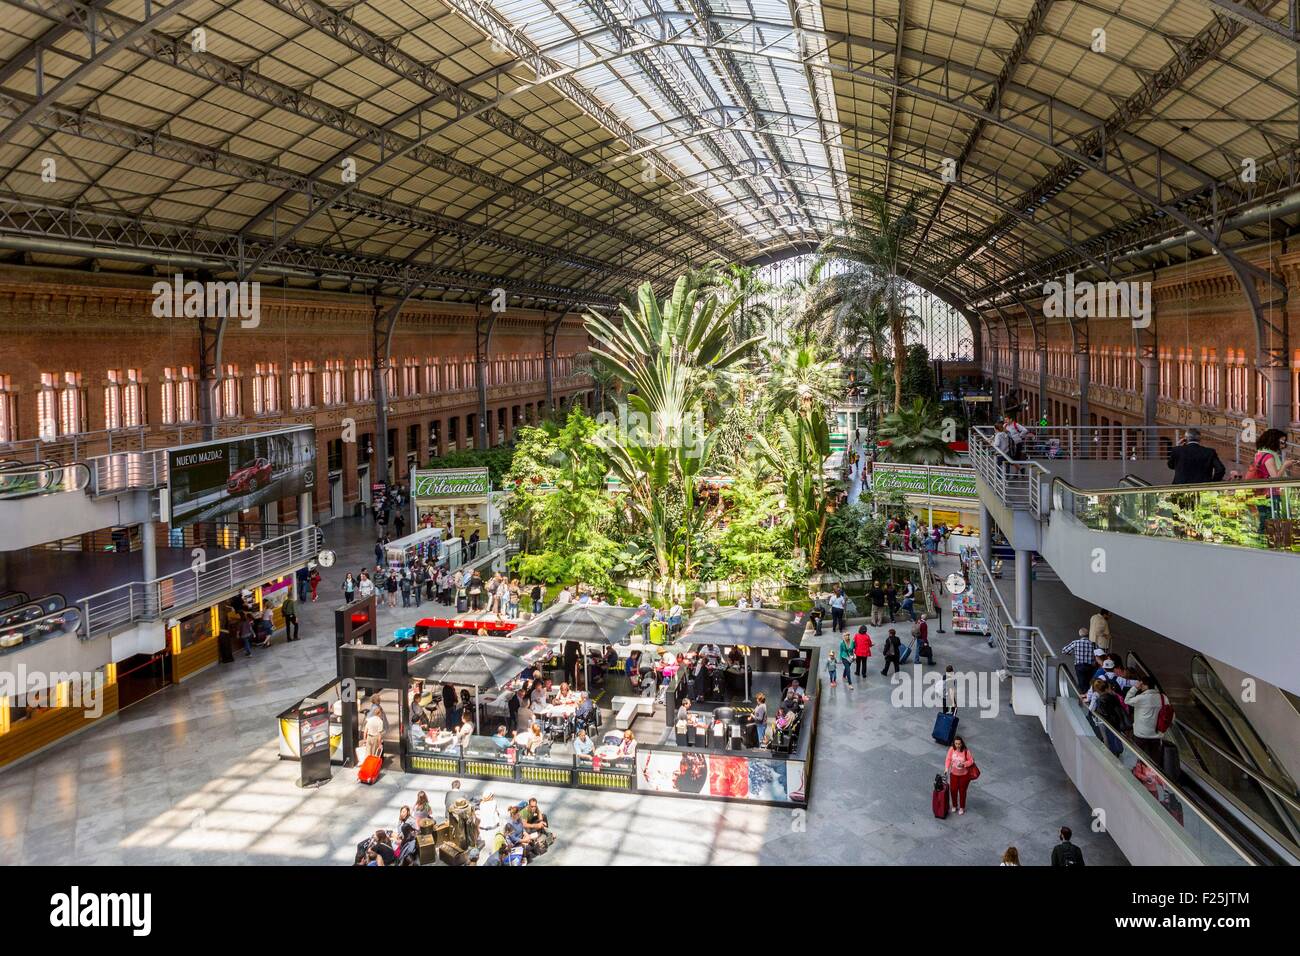 Spain, Madrid, Atocha station in the late nineteenth century when in 1992 the architect Raphael Moneo installs a 4000 m▓ garden with 7000 trees and plants in the former train hall Stock Photo